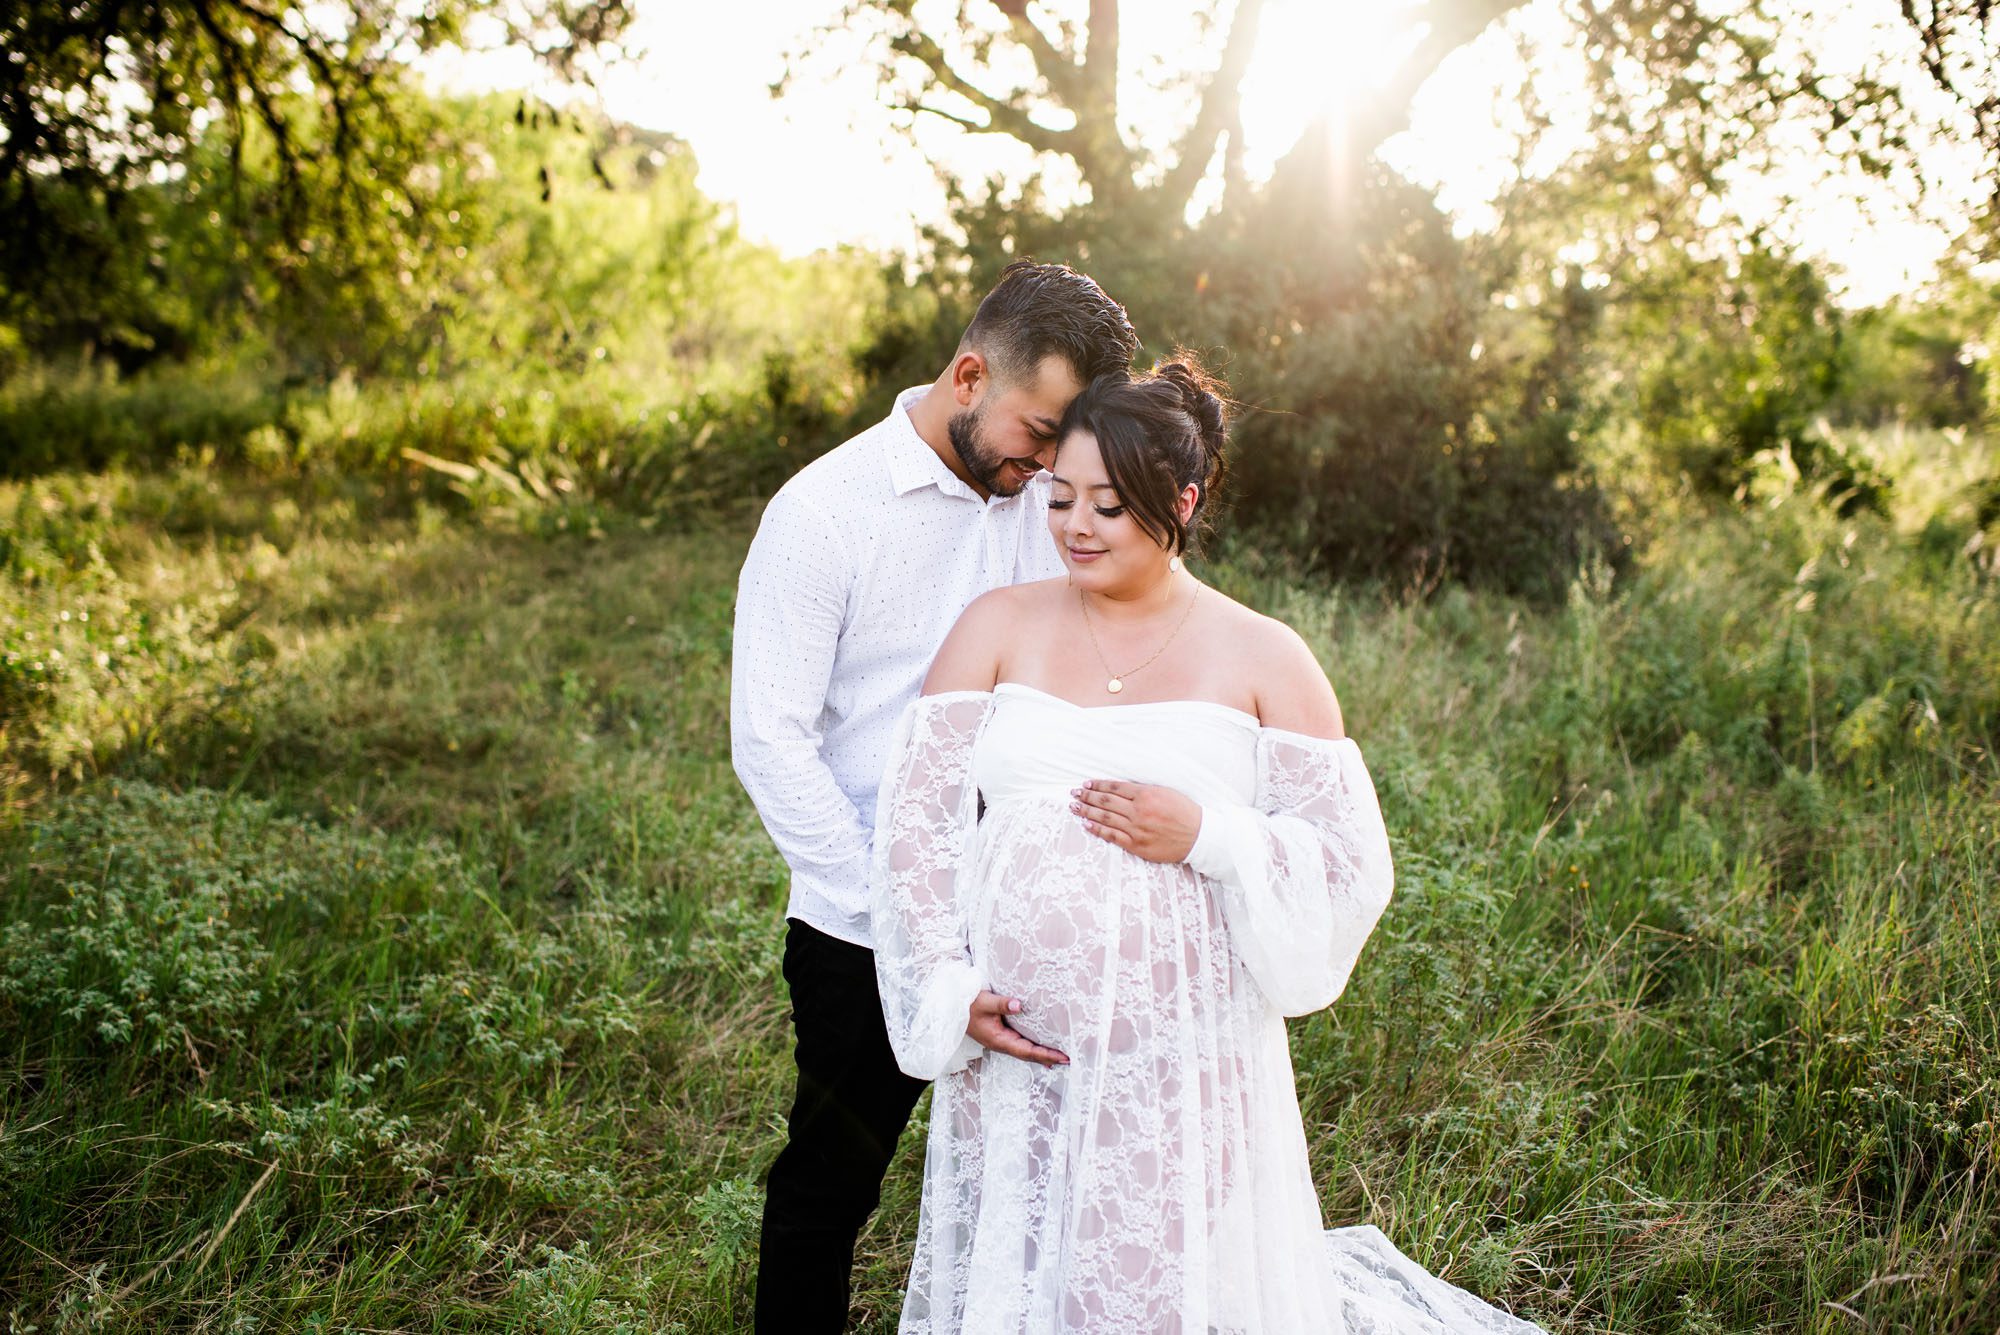 Expectant couple standing together in field at sunset, Best San Antonio maternity lifestyle photographers